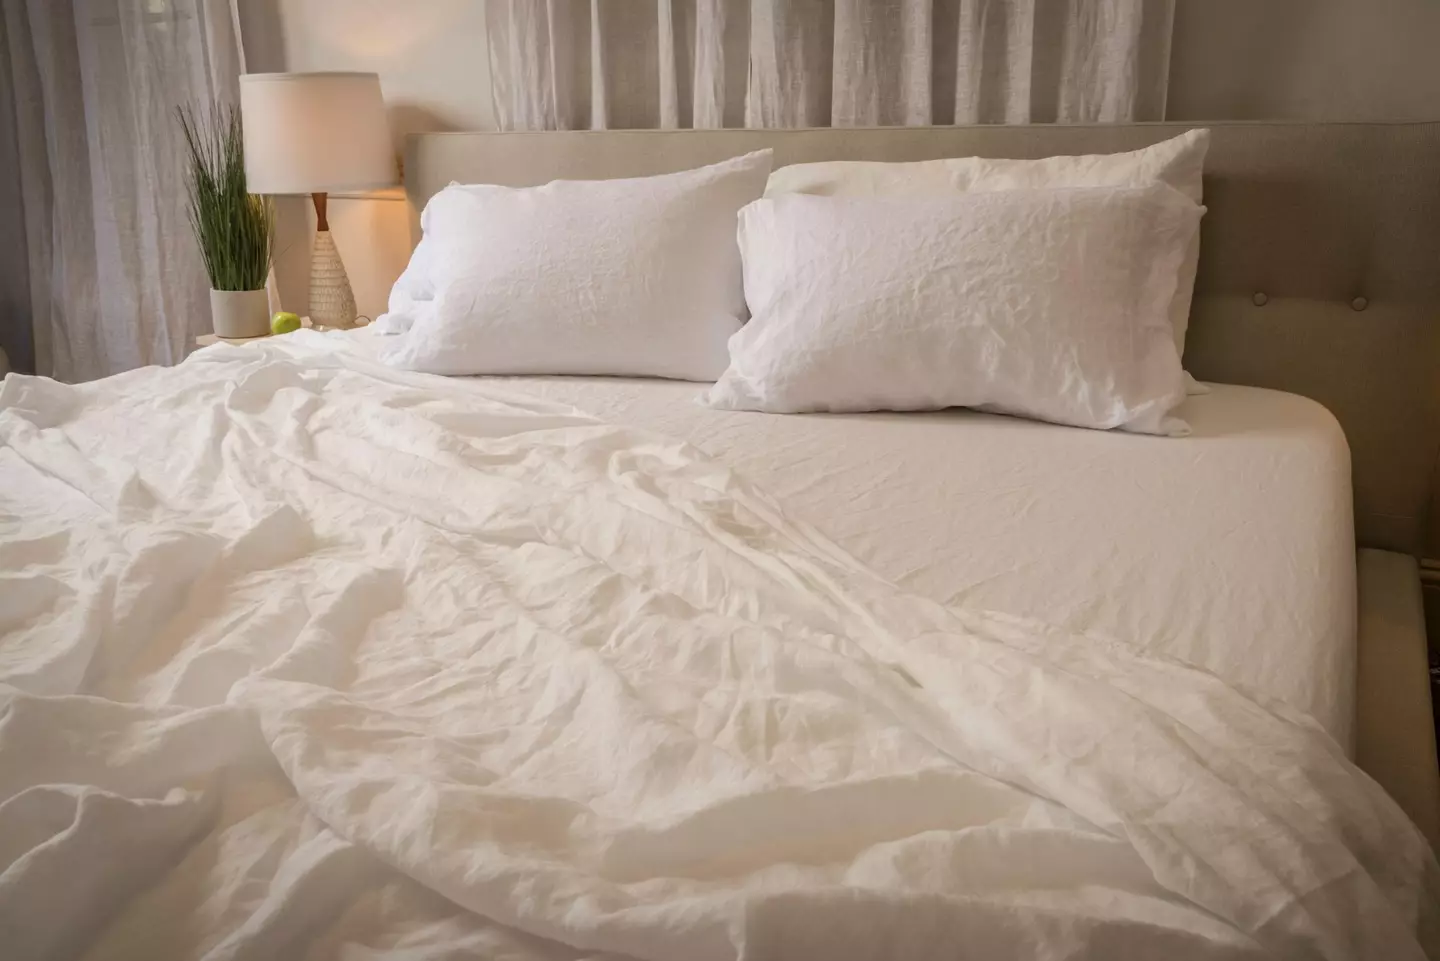 One woman has come up with a genius way to make the bed in just a few minutes.